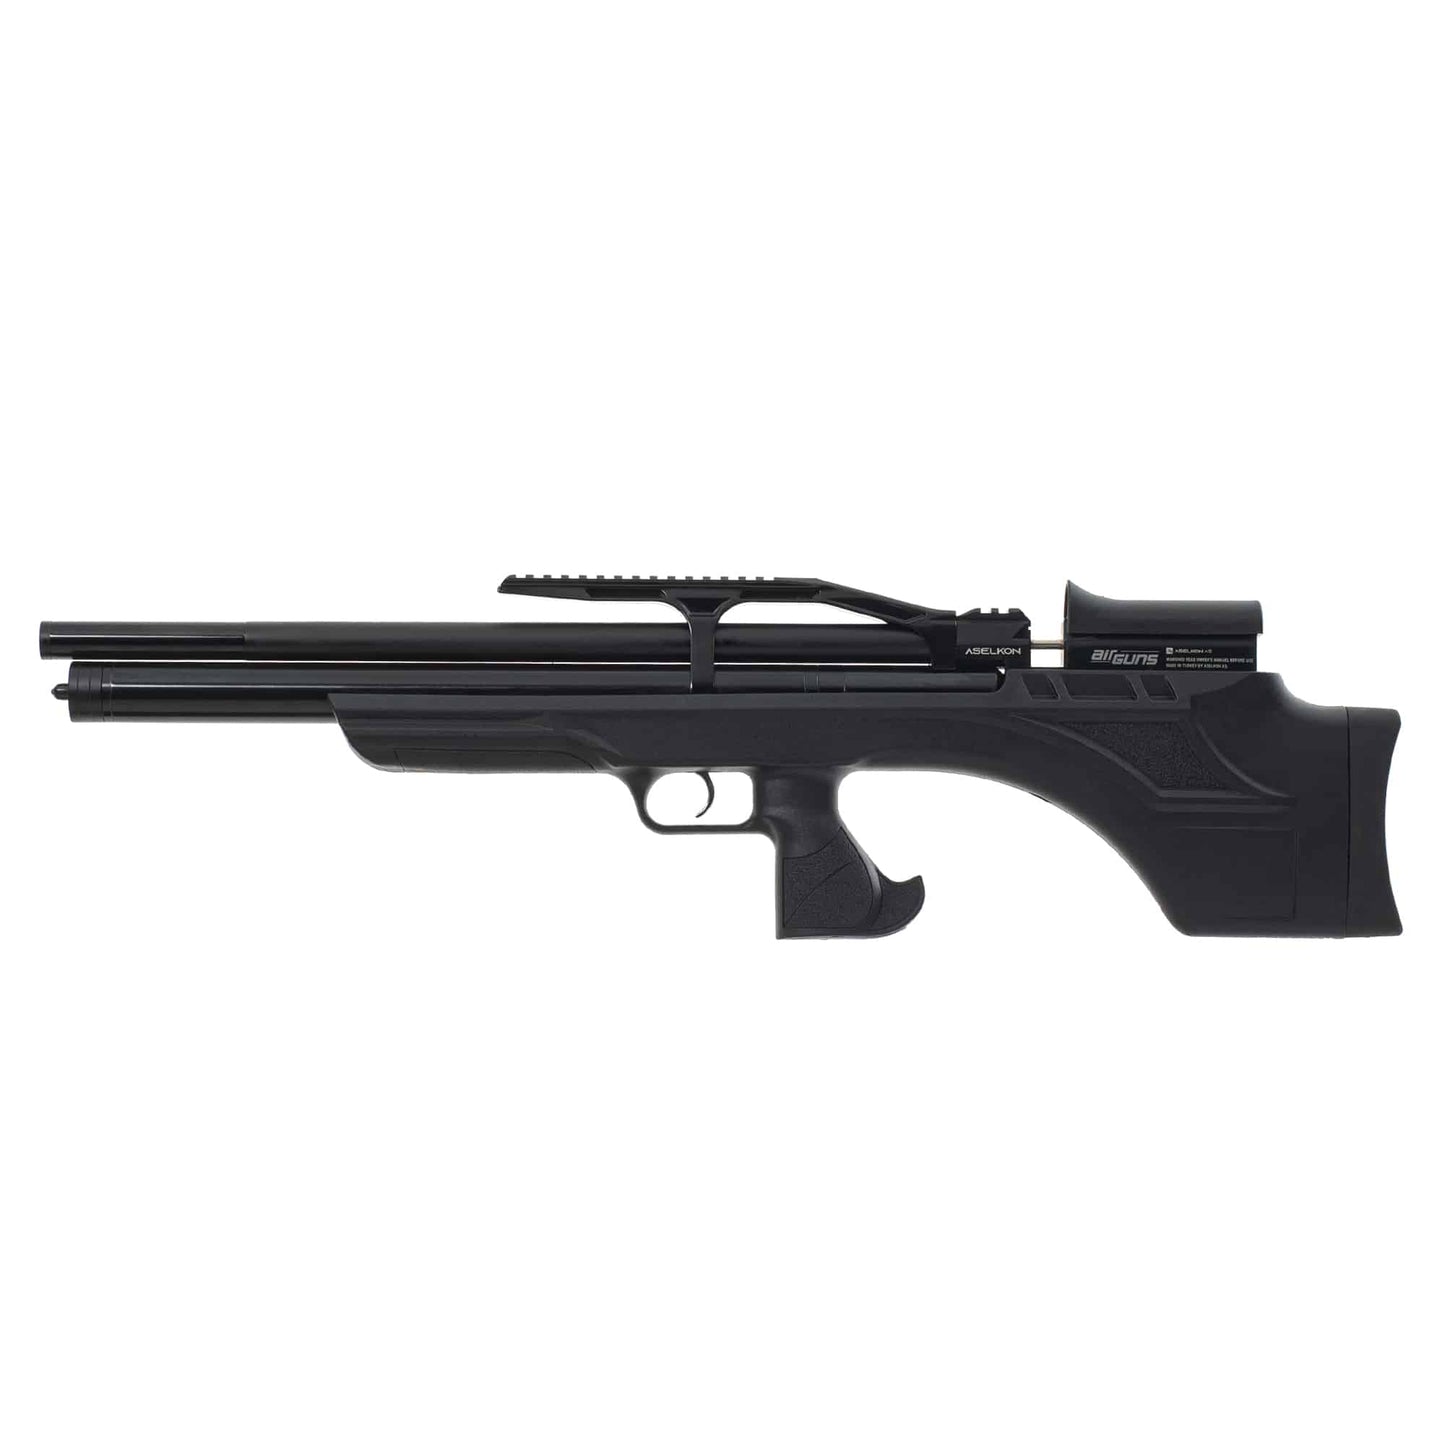 Aselkon MX7S .22 Caliber PCP Air Rifle with black synthetic stock